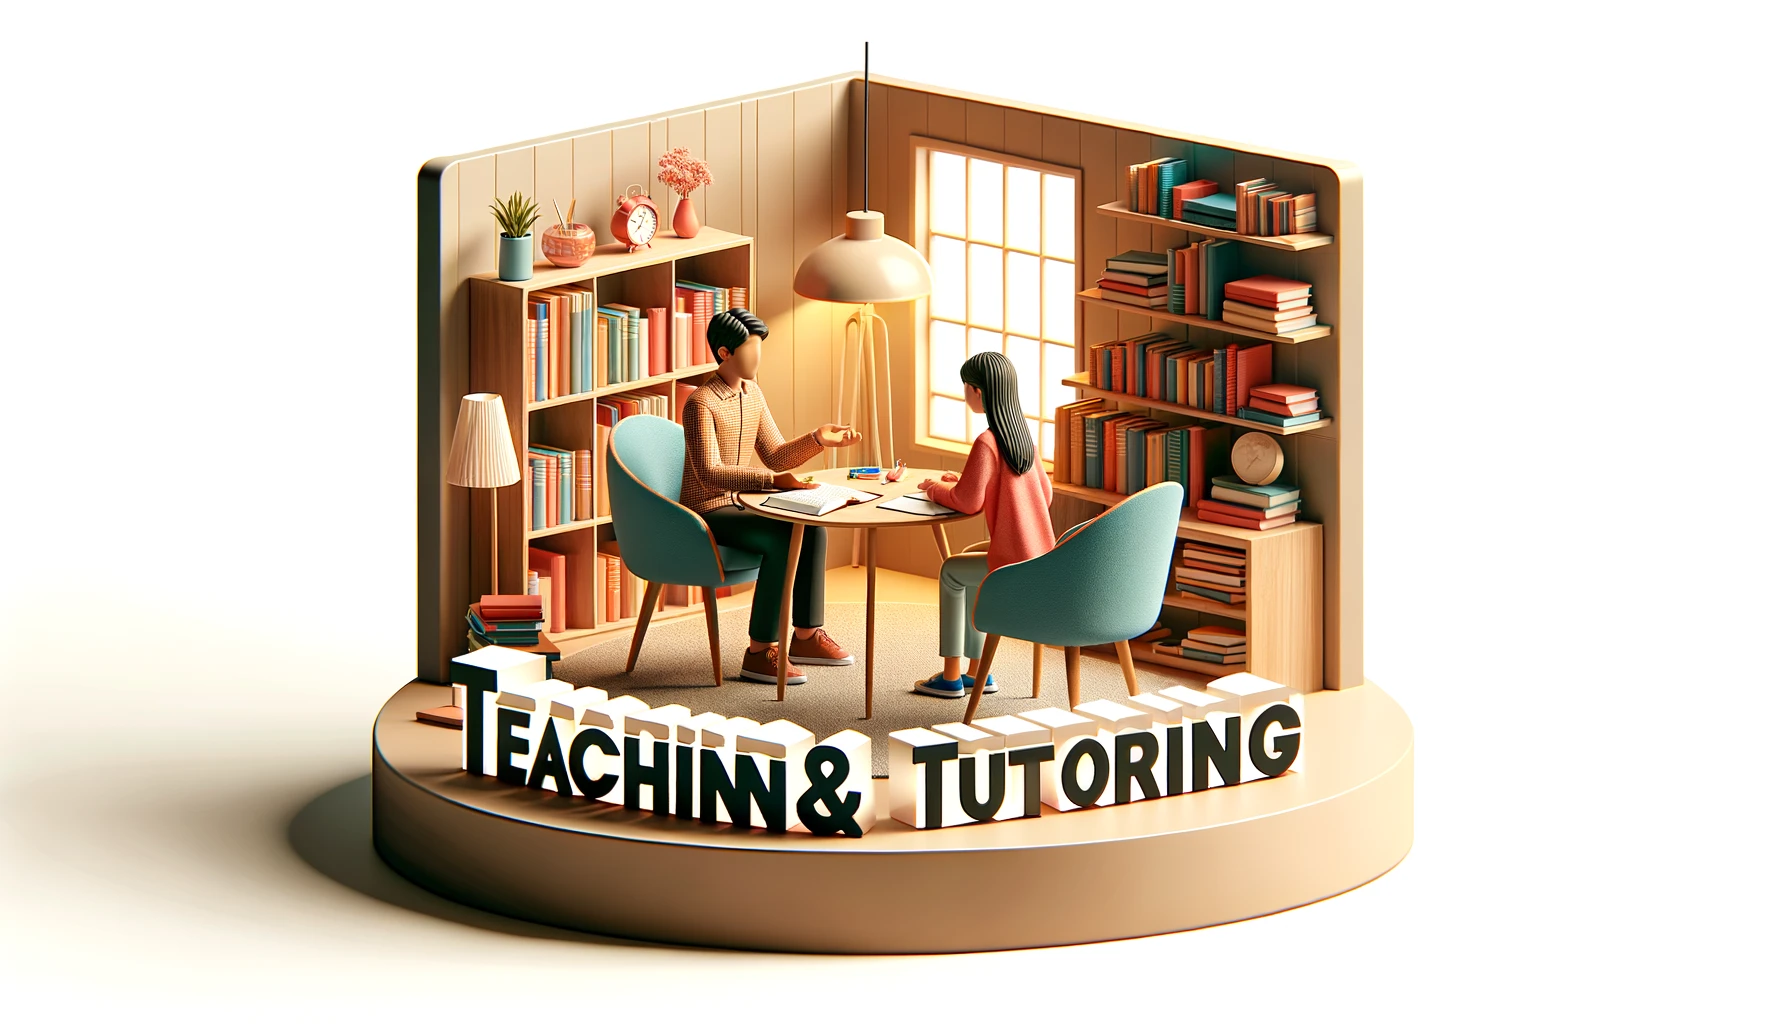 Teaching and tutoring education niches